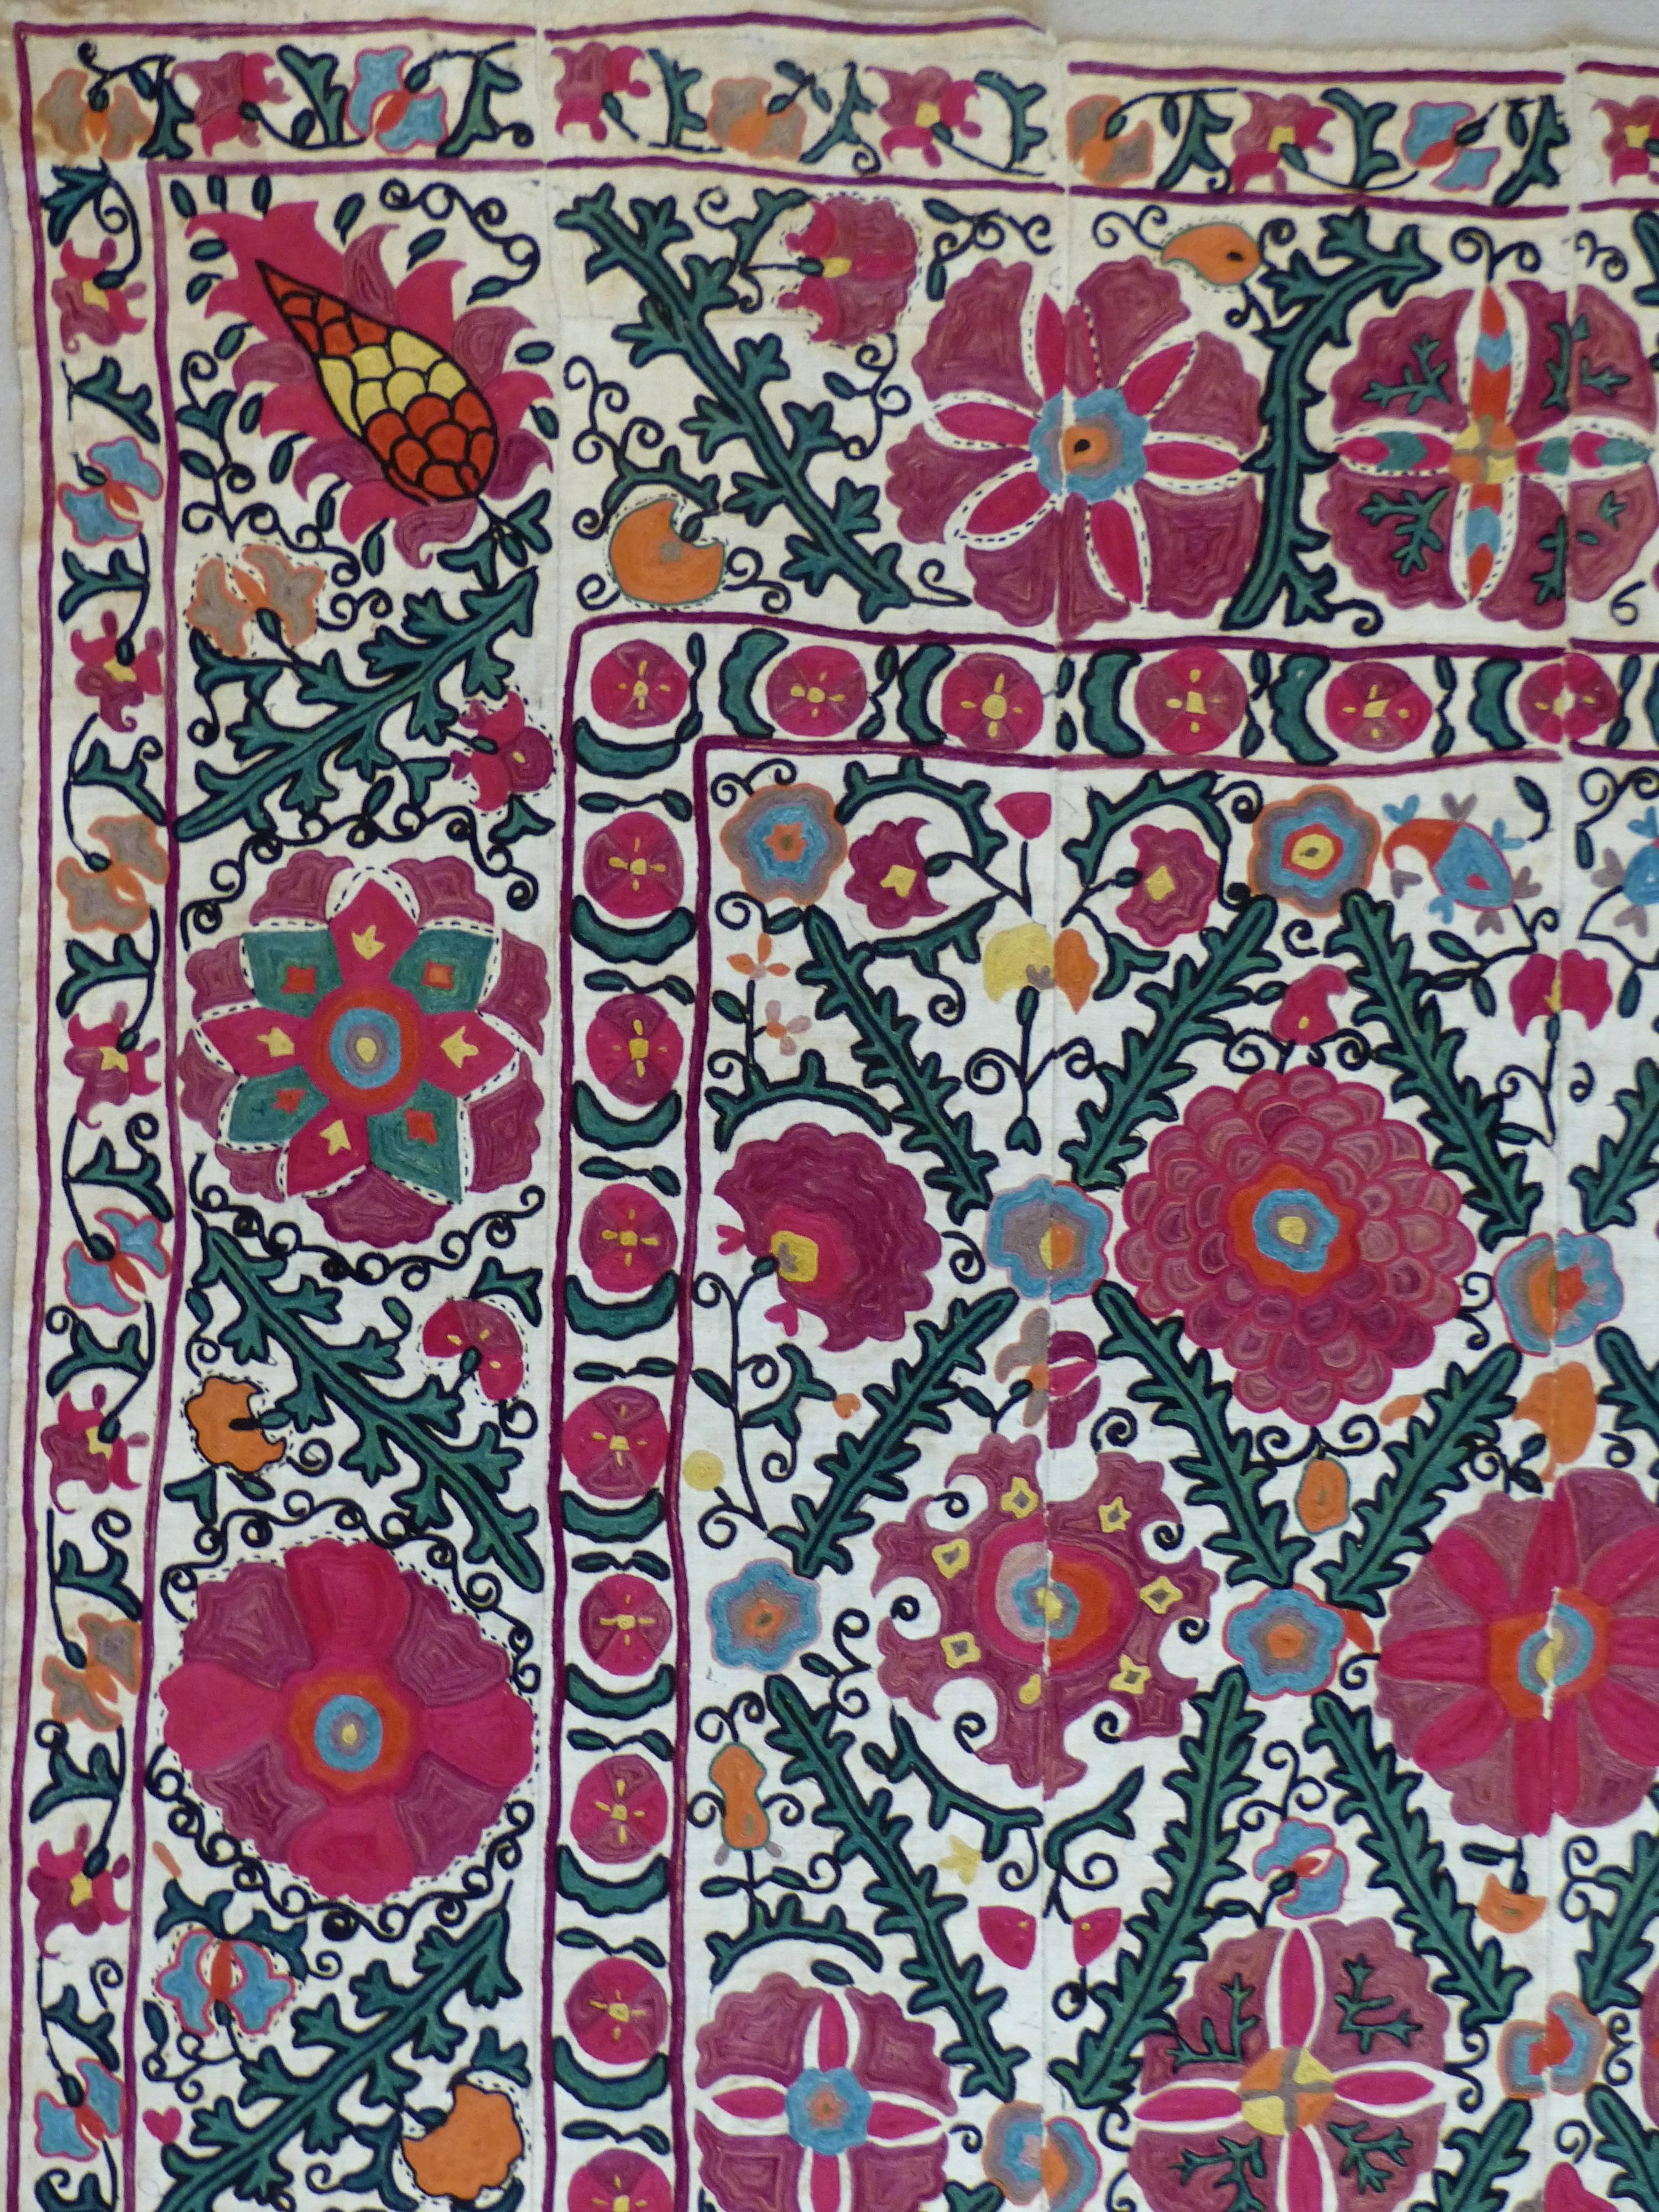 19th century Suzani embroidery. Decorative tribal textile made in Central Asia. The name Suzani is from the Persian 